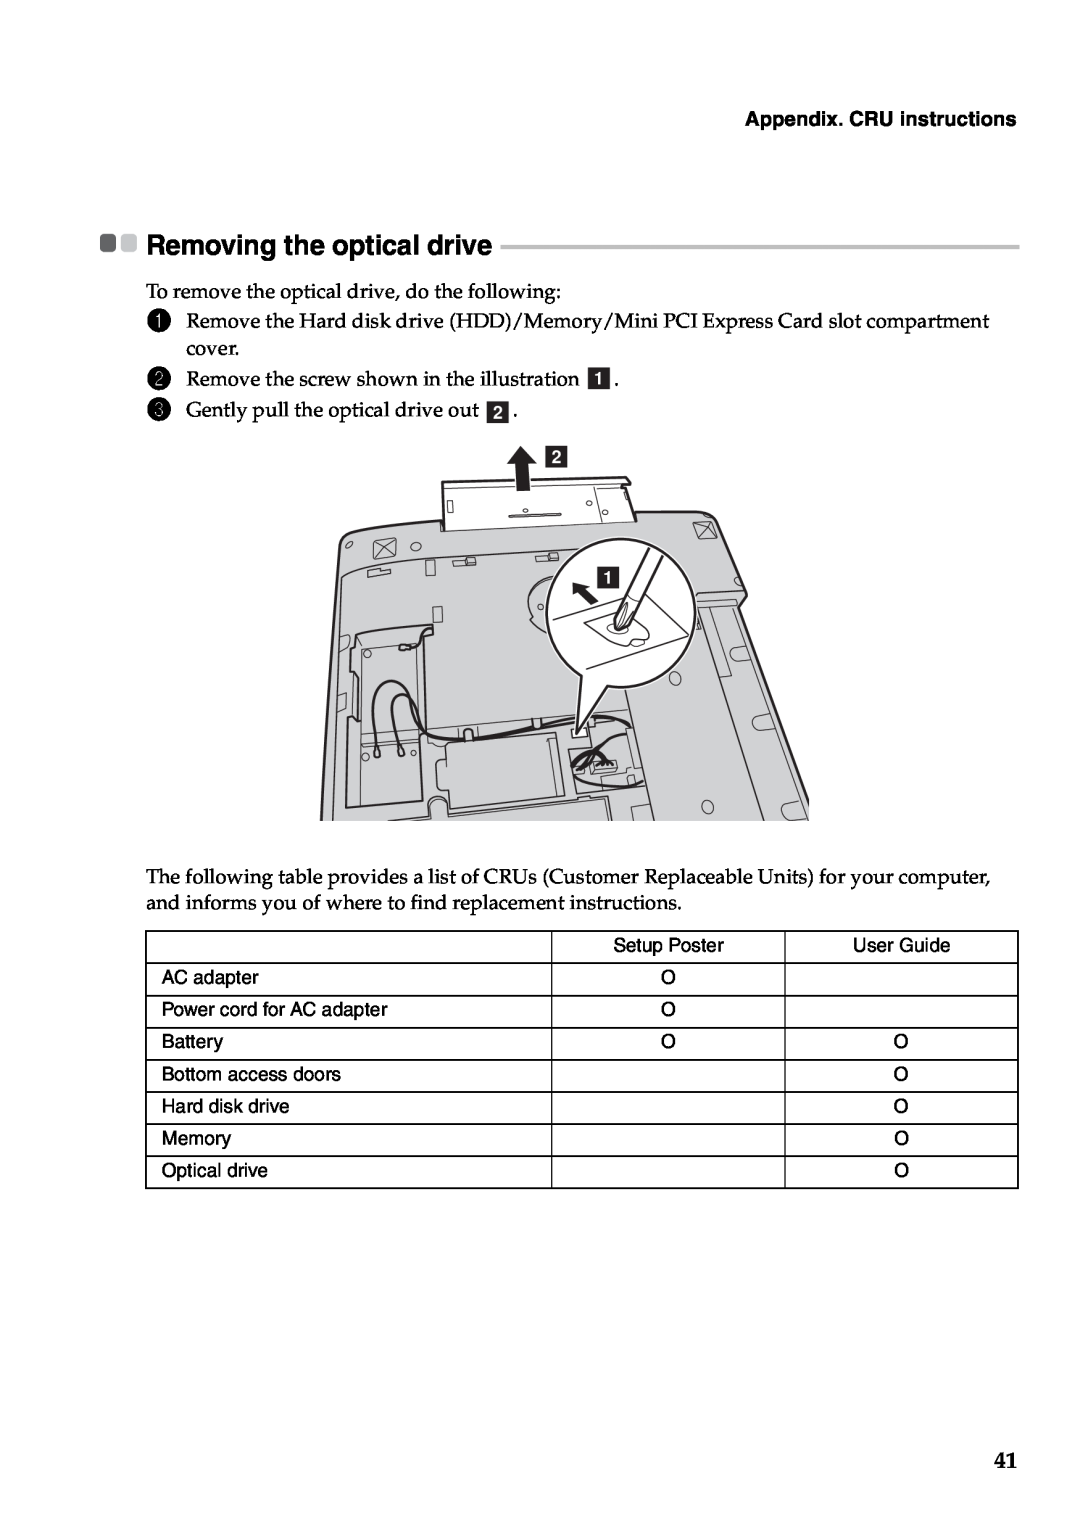 Lenovo Y480, Y580 manual Removing the optical drive, Appendix. CRU instructions 